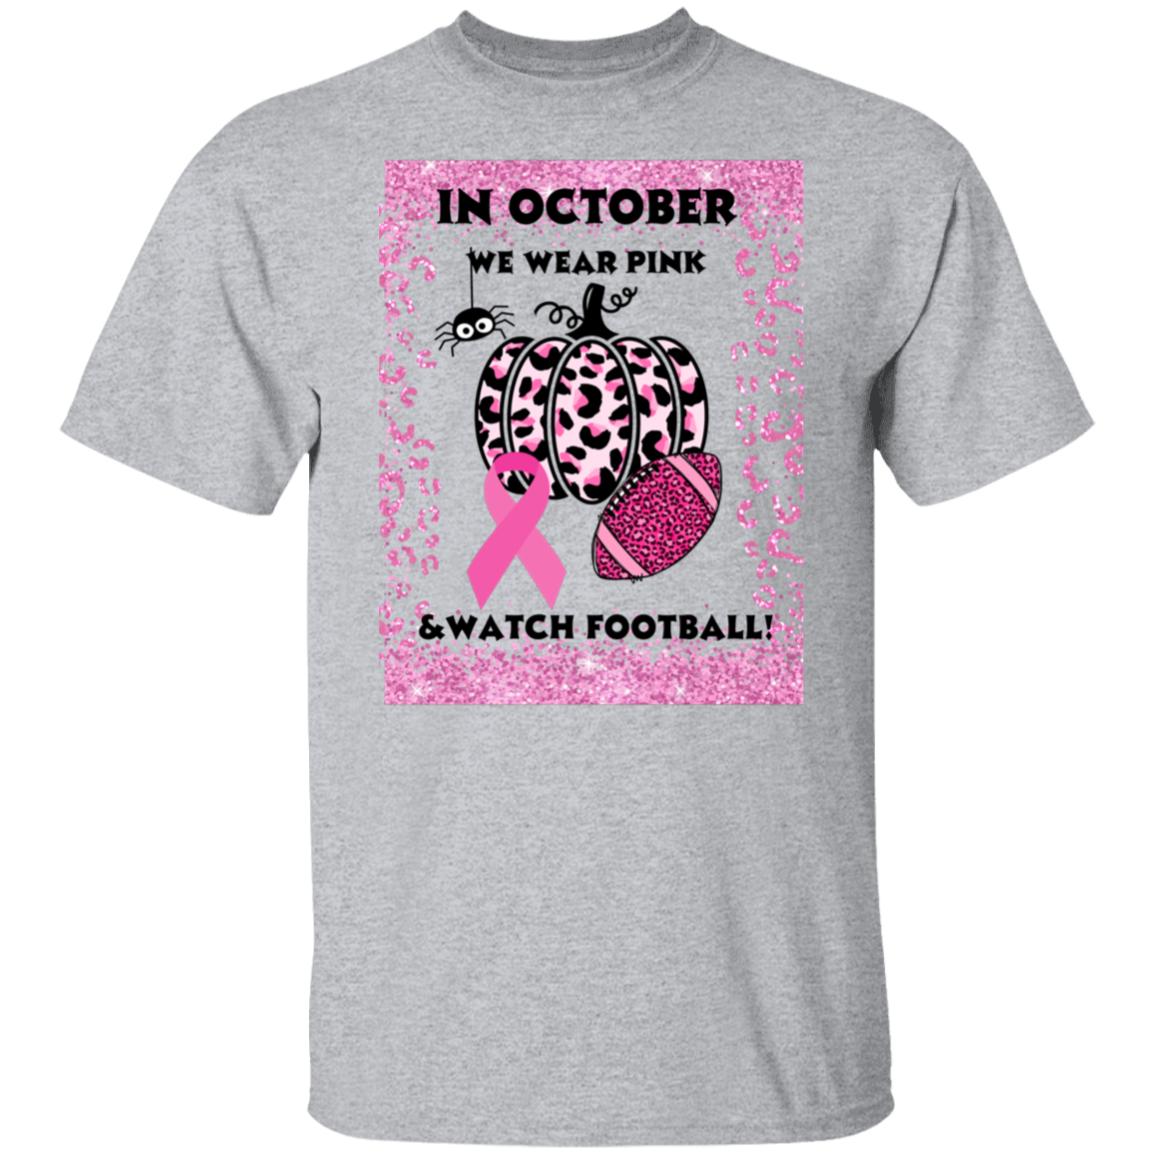 Support Breast Cancer Awareness We marked down all In October we wear pink & watch football gear!